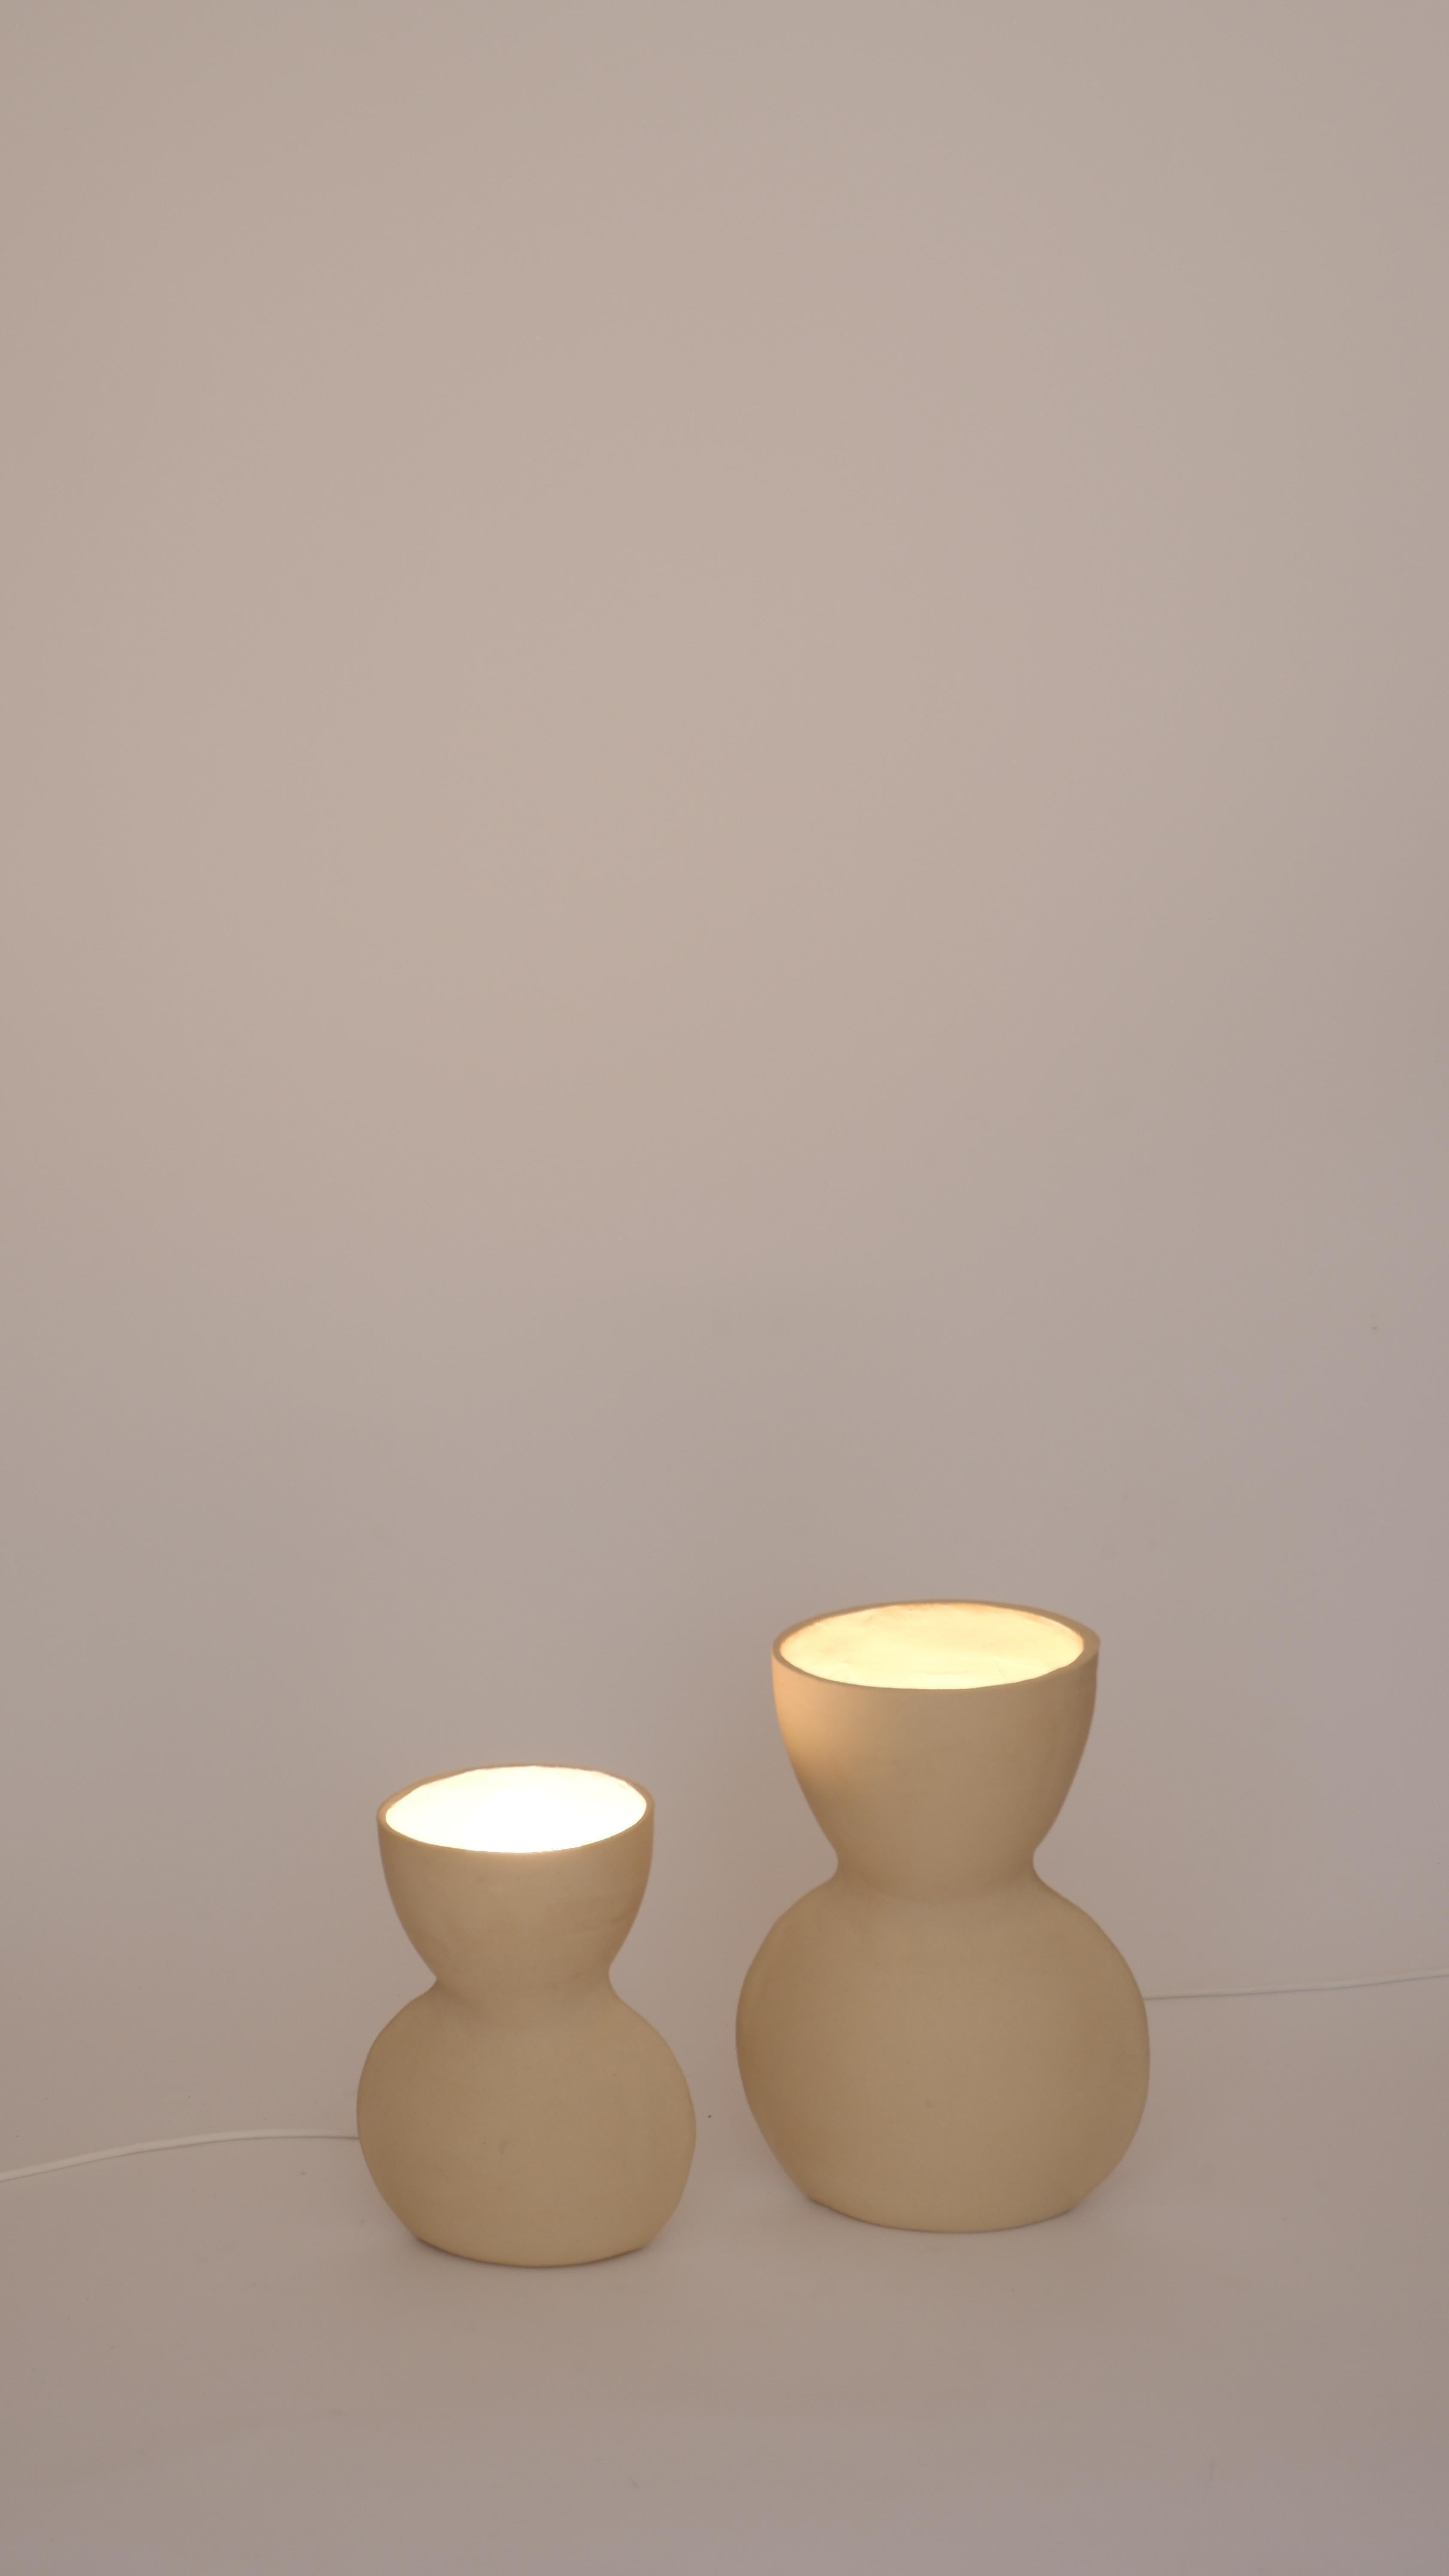 Set Of 2 Unira White Lamps by Ia Kutateladze
One Of A Kind.
Dimensions: Small: D 14 x W 18 x H 25 cm.
Big: D 17 x W 23 x H 32 cm. 
Materials: Clay.

Each piece is one of a kind, due to its free hand-building process. Different color variations